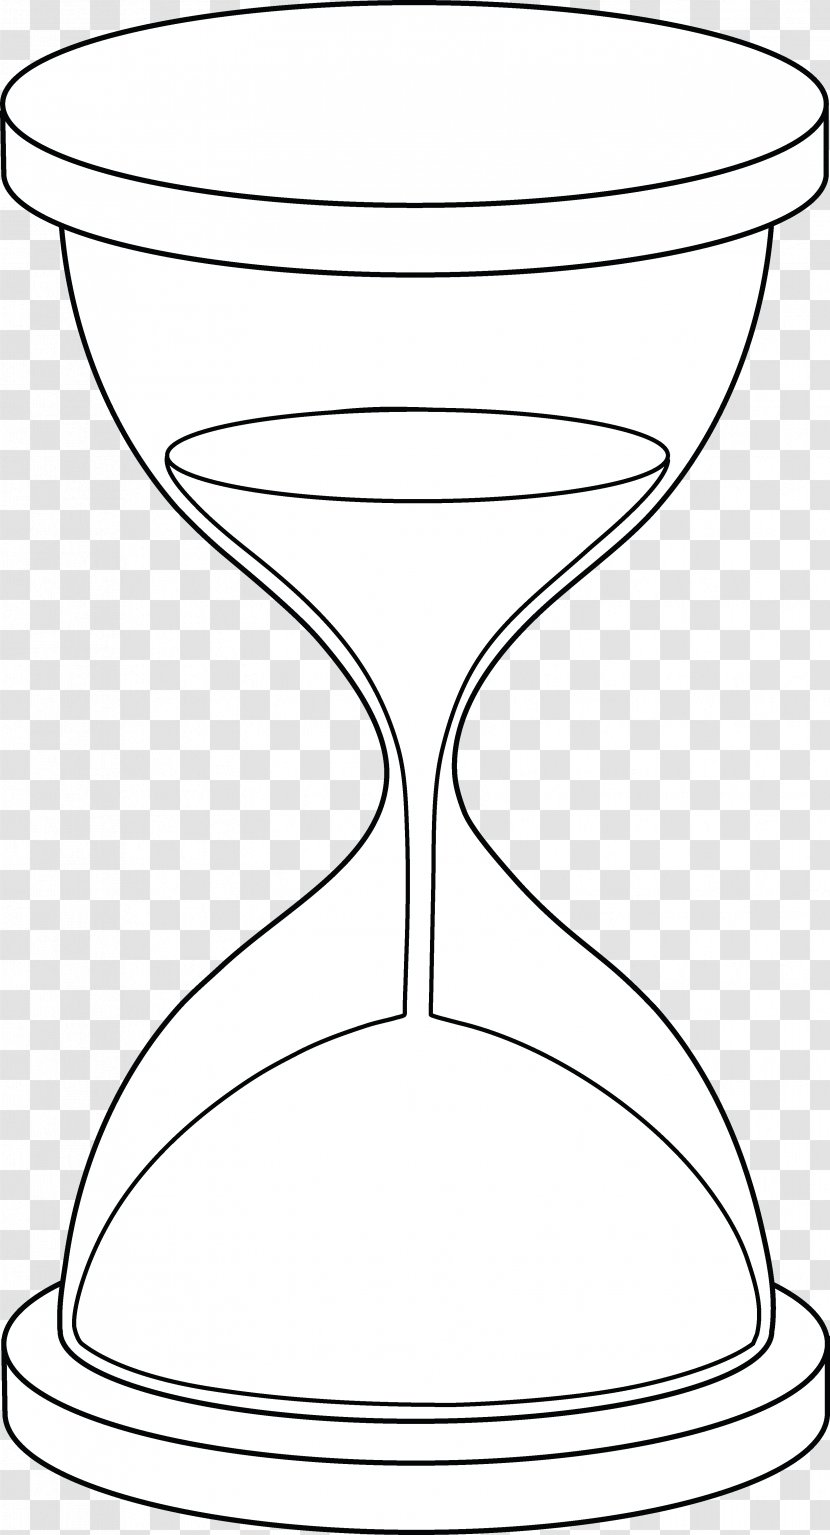 Hourglass Coloring Book Drawing Clip Art - Serveware - Hour Glass Transparent PNG